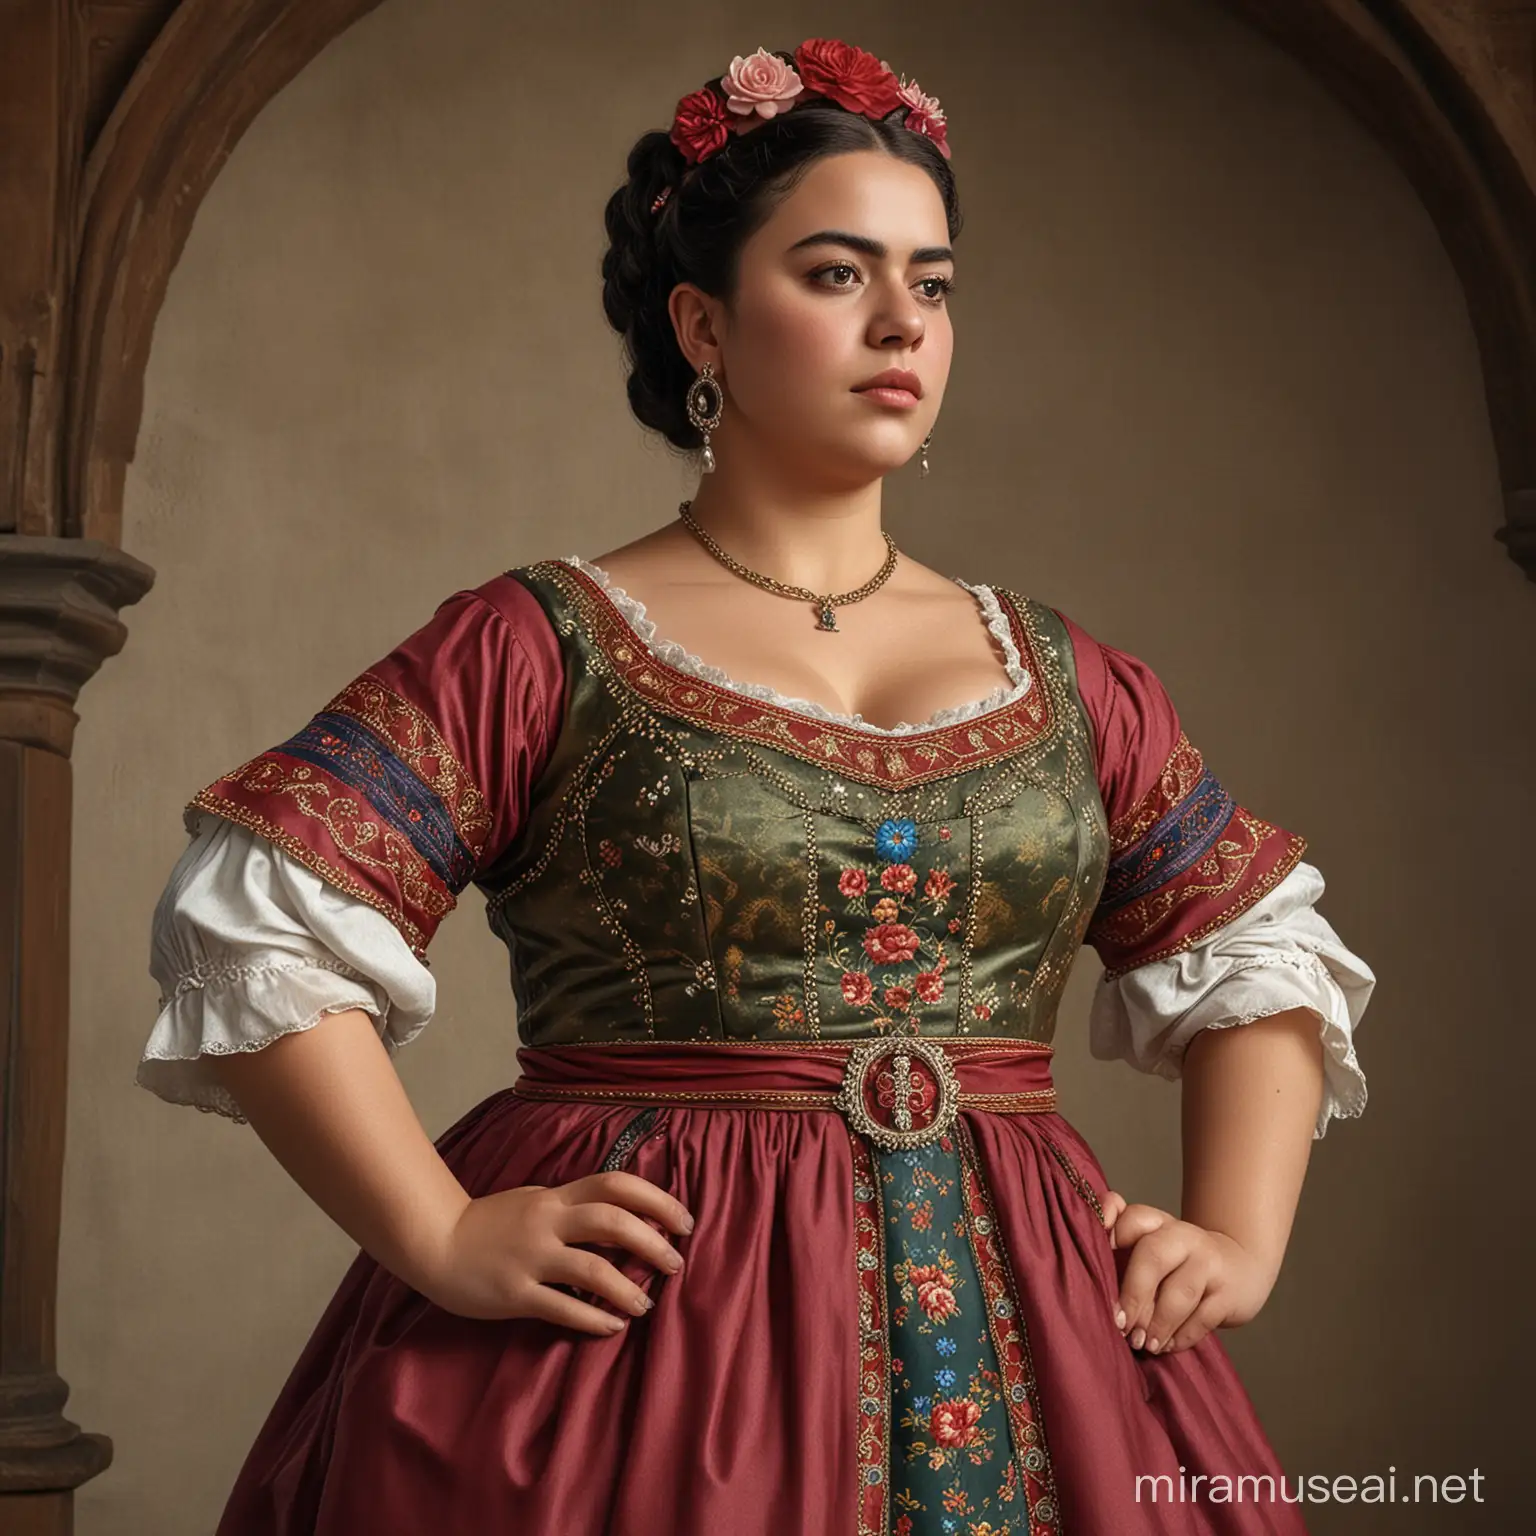 Camila Falquez depicting chubby Frida Coelho in tight medieval dress  , realistic photo, high_res, high details, color. 